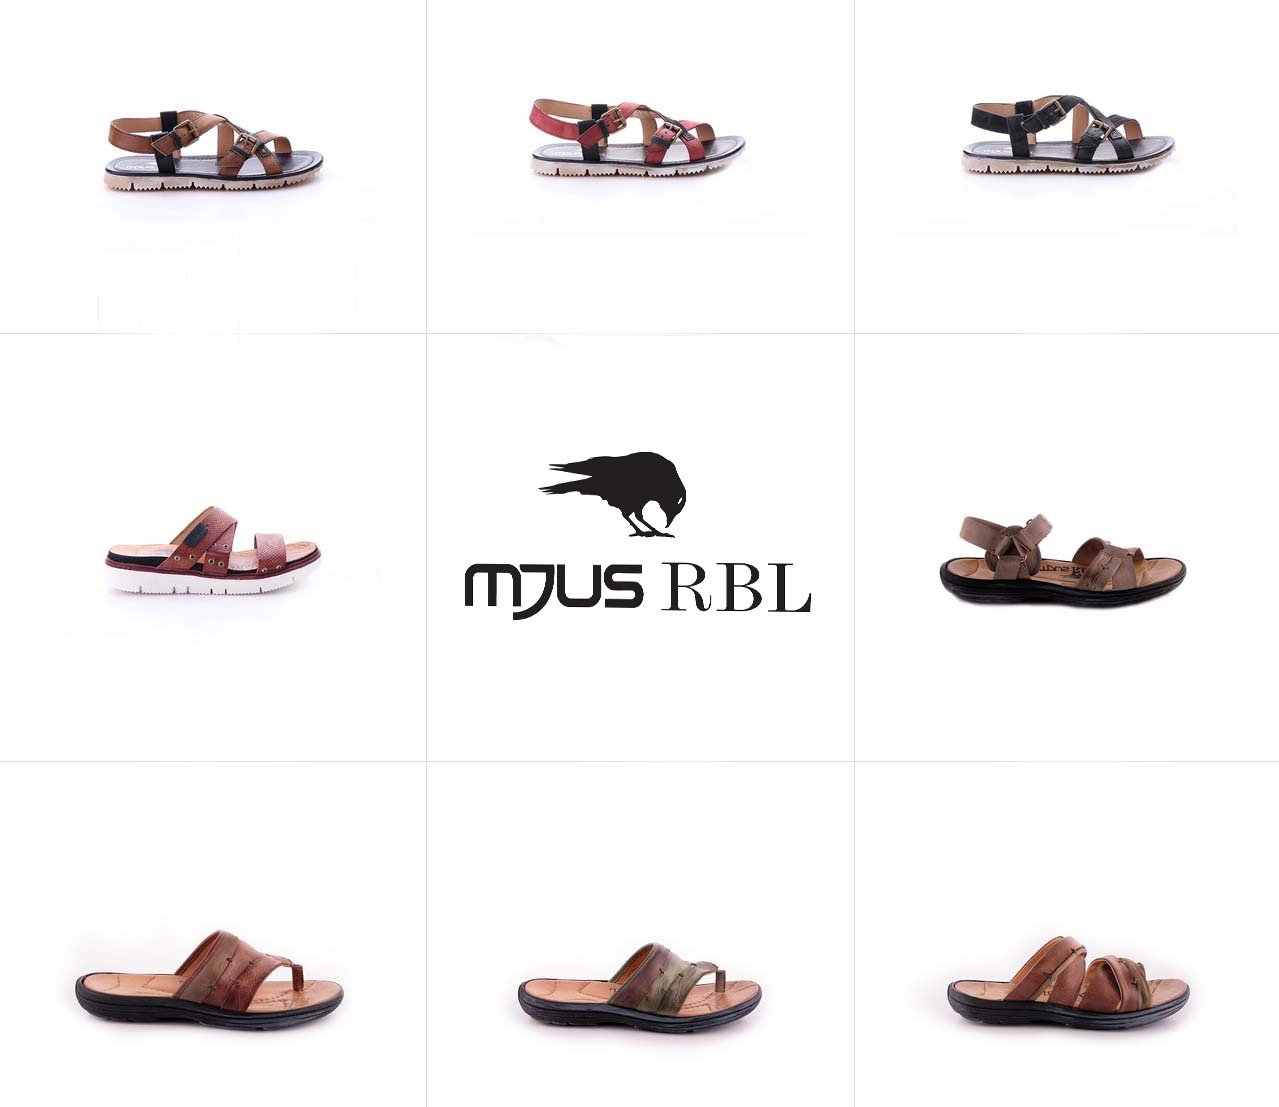 toegang Een goede vriend garage Mjus Shoes on Twitter: "Men sandals are the way forward this summer season  and they come in many different colours and styles! #MjusRbl  https://t.co/i2HfBPFr0e" / Twitter